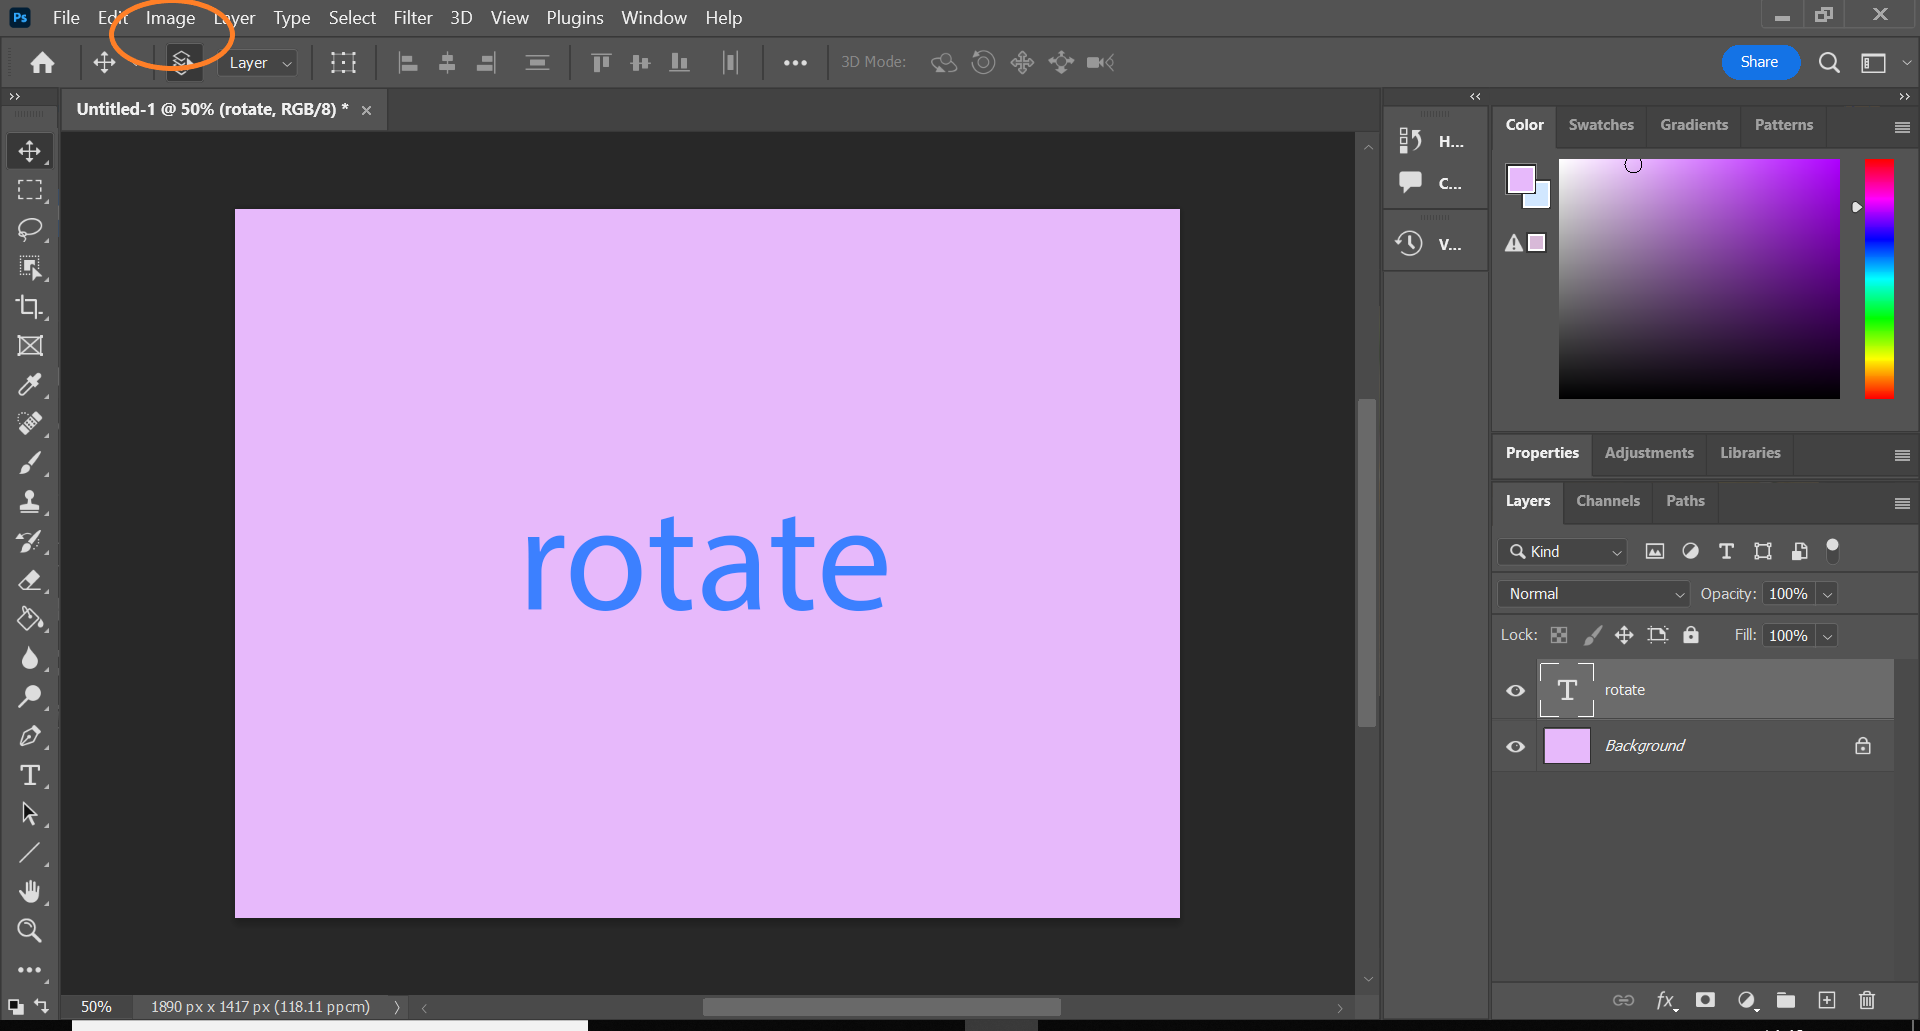 How to rotate an image in Photoshop